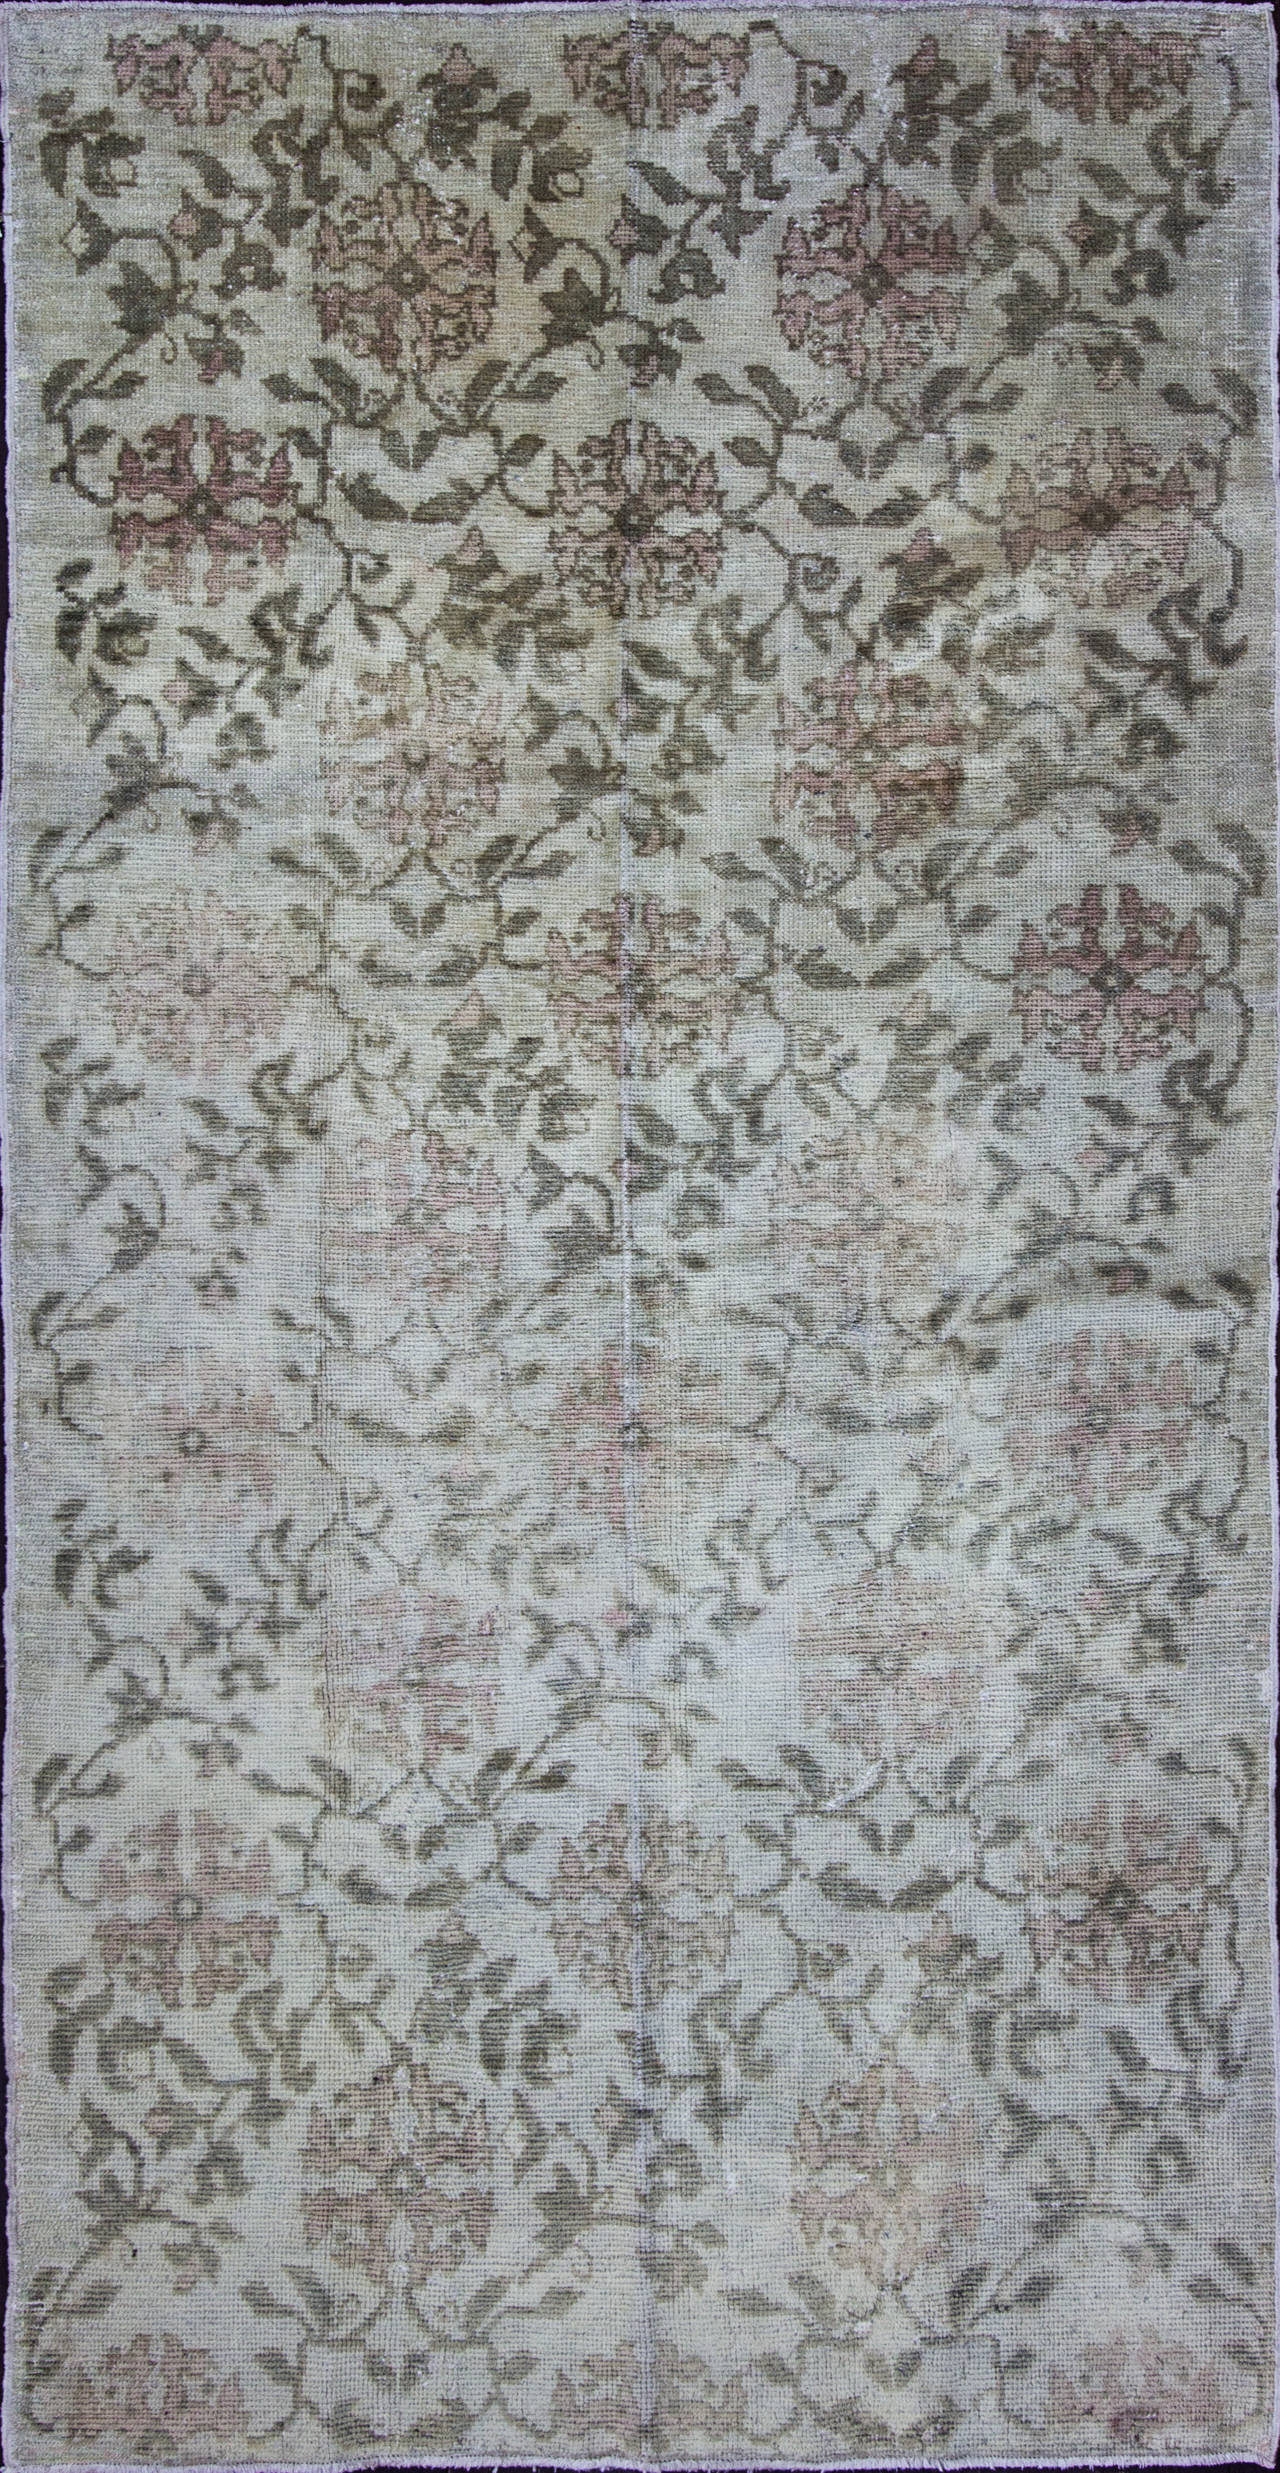 Ushak rugs have been in production since the 15th century with superb wools and natural dyes. Unlike other Turkish rugs, Ushak rugs influenced after Persian rugs and they wove with Ghiordes knots and all double knotted, their design is feature